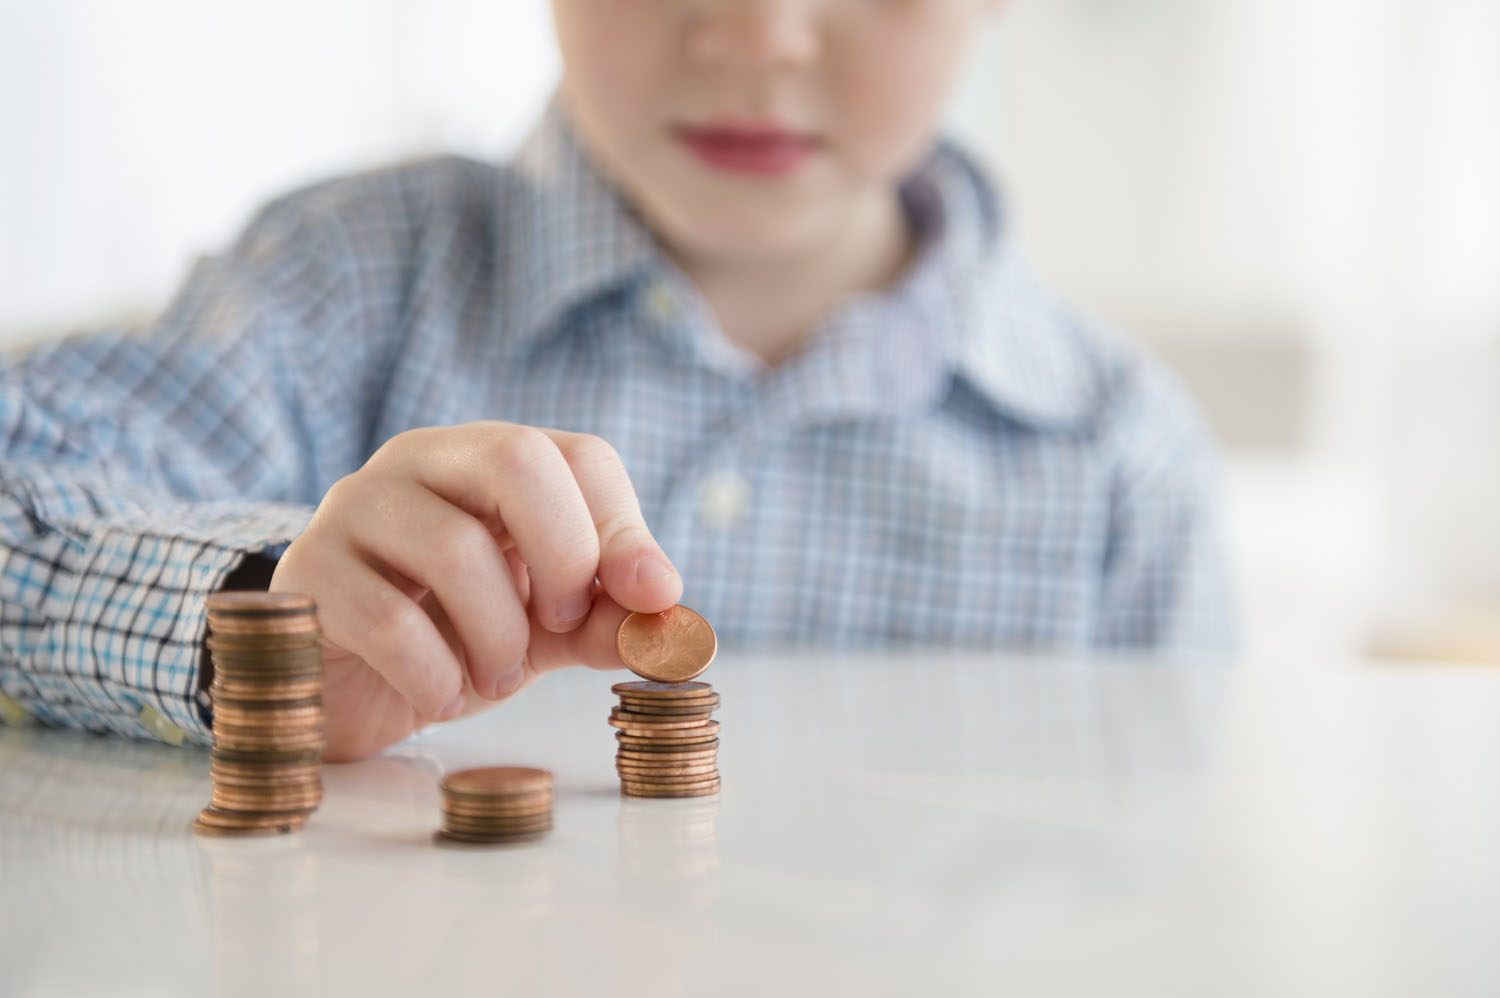 A new study shows children are receiving larger allowances from their parents. (Jamie Grill&mdash;Getty Images)